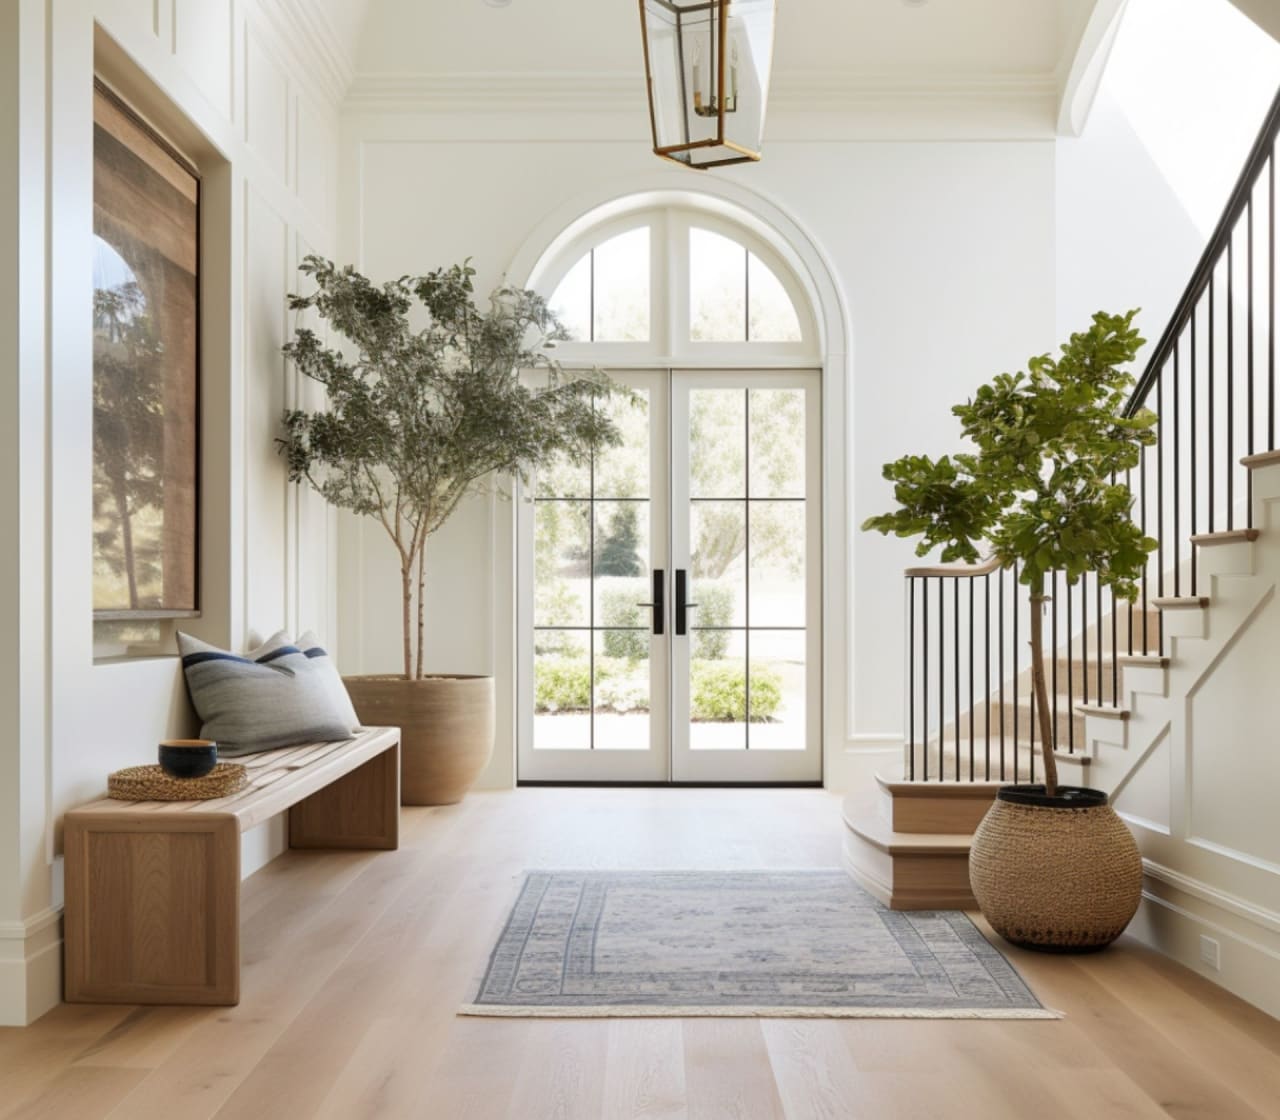 A bright, airy hallway featuring white painted wainscoting, a long wooden bench, a trio of potted plants, and a staircase.